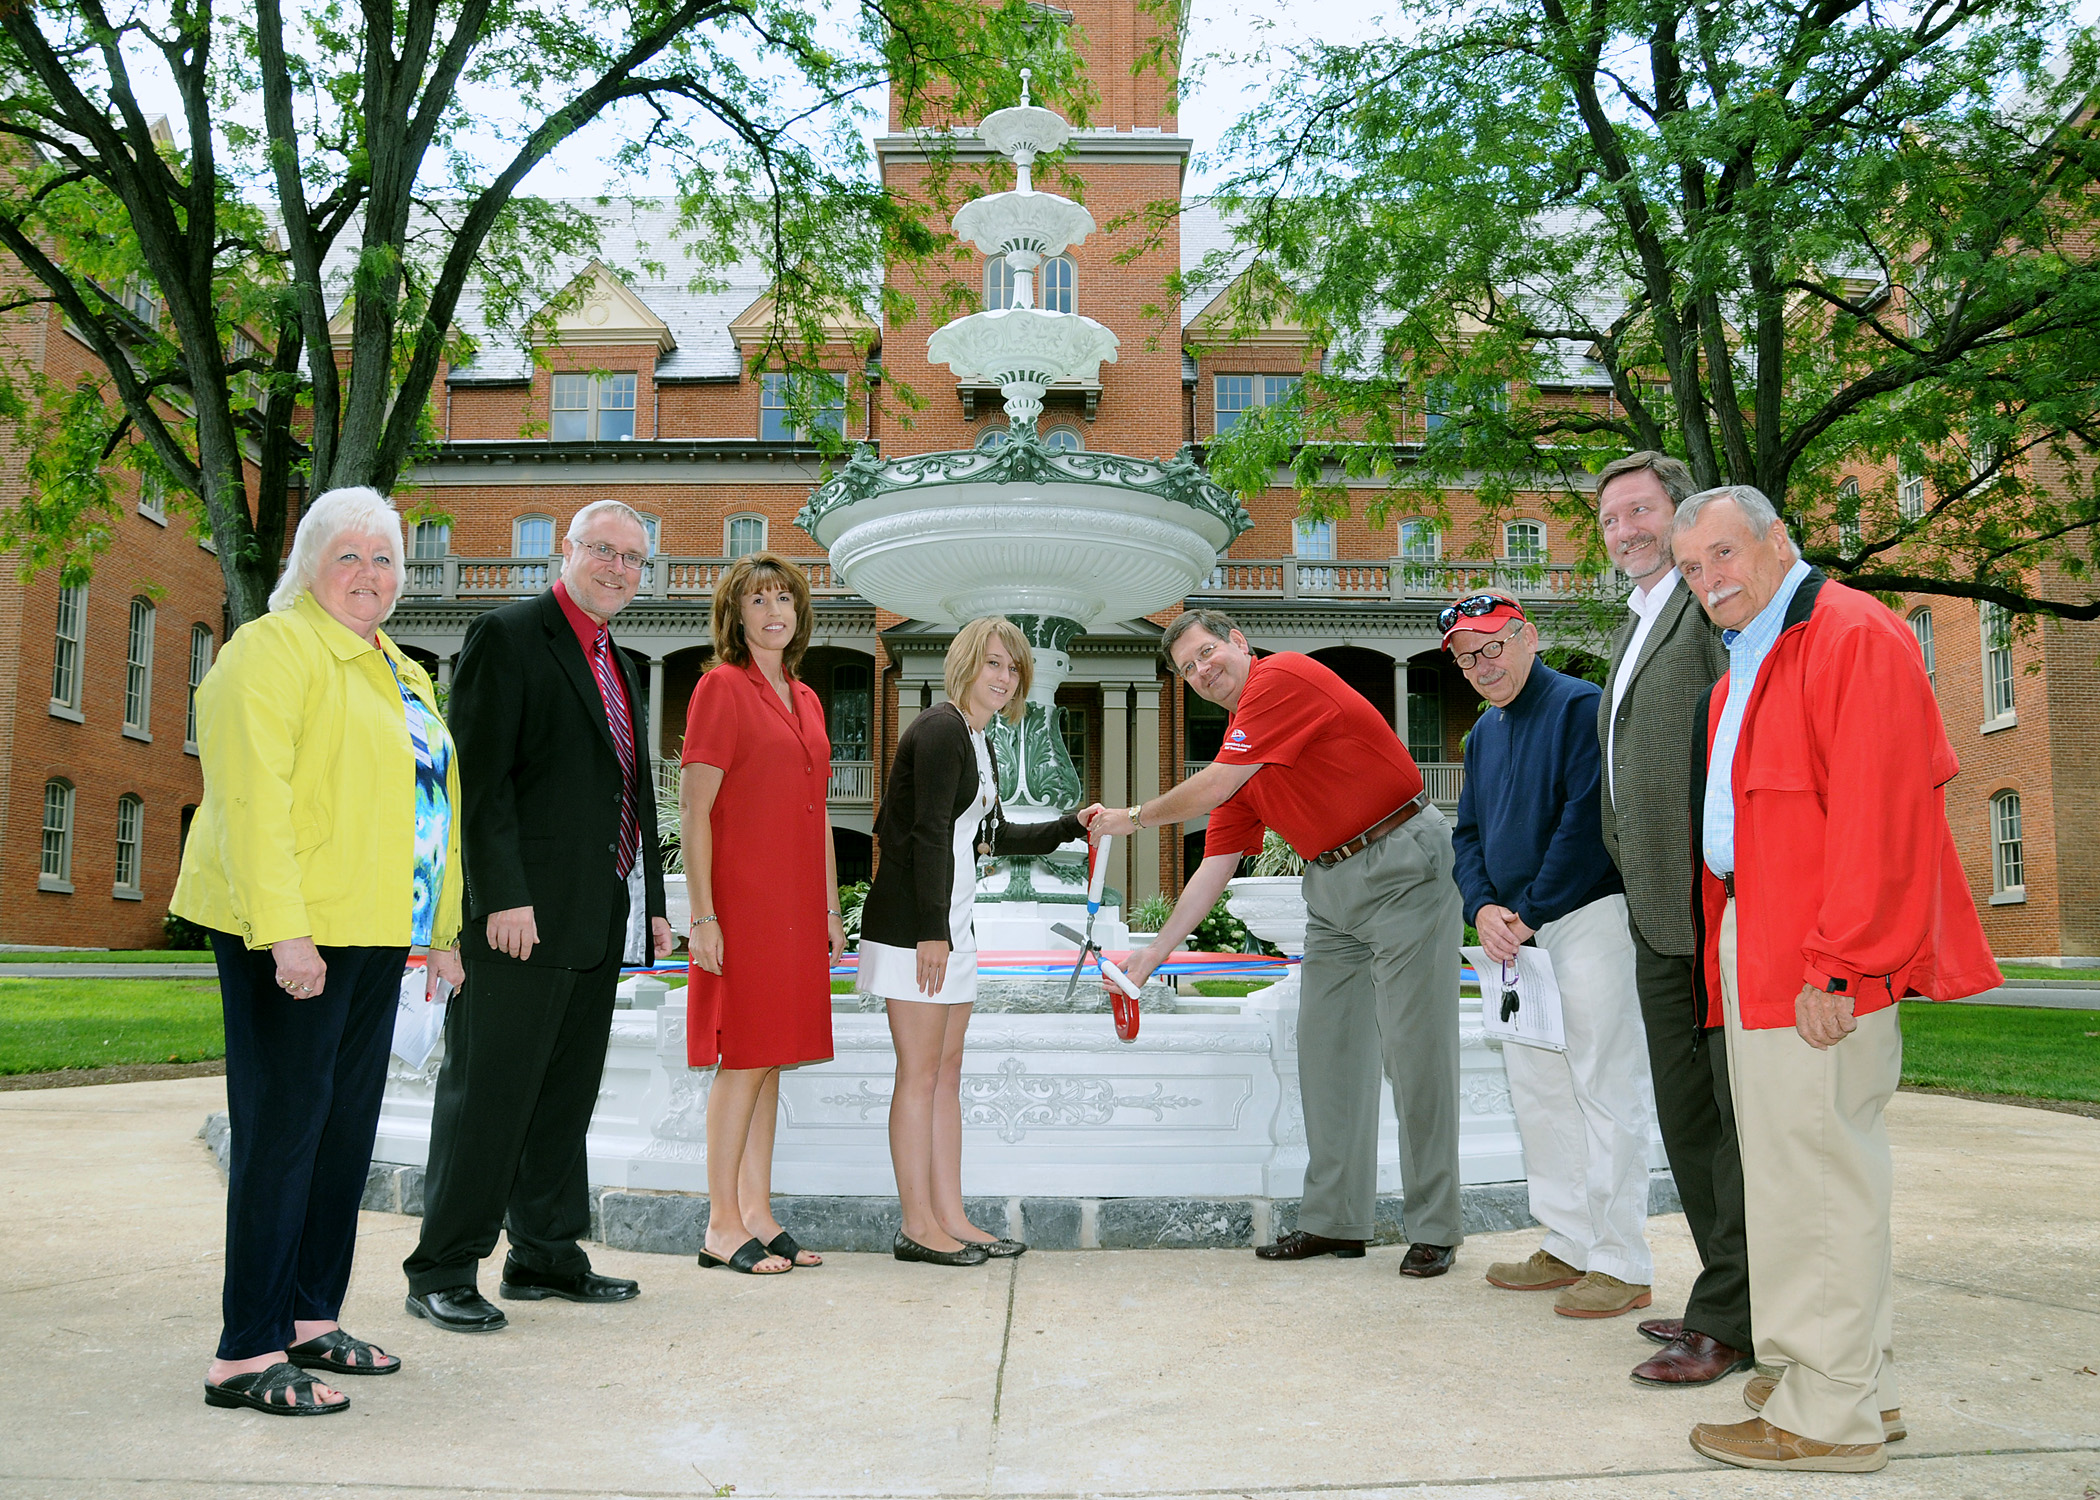 Shippensburg University’s restored Old Main Fountain will receive a Construction Project Award for Public & Institutional Properties at the Pennsylvania Historic Preservation Awards luncheon in Pottstown on Friday, September 27.